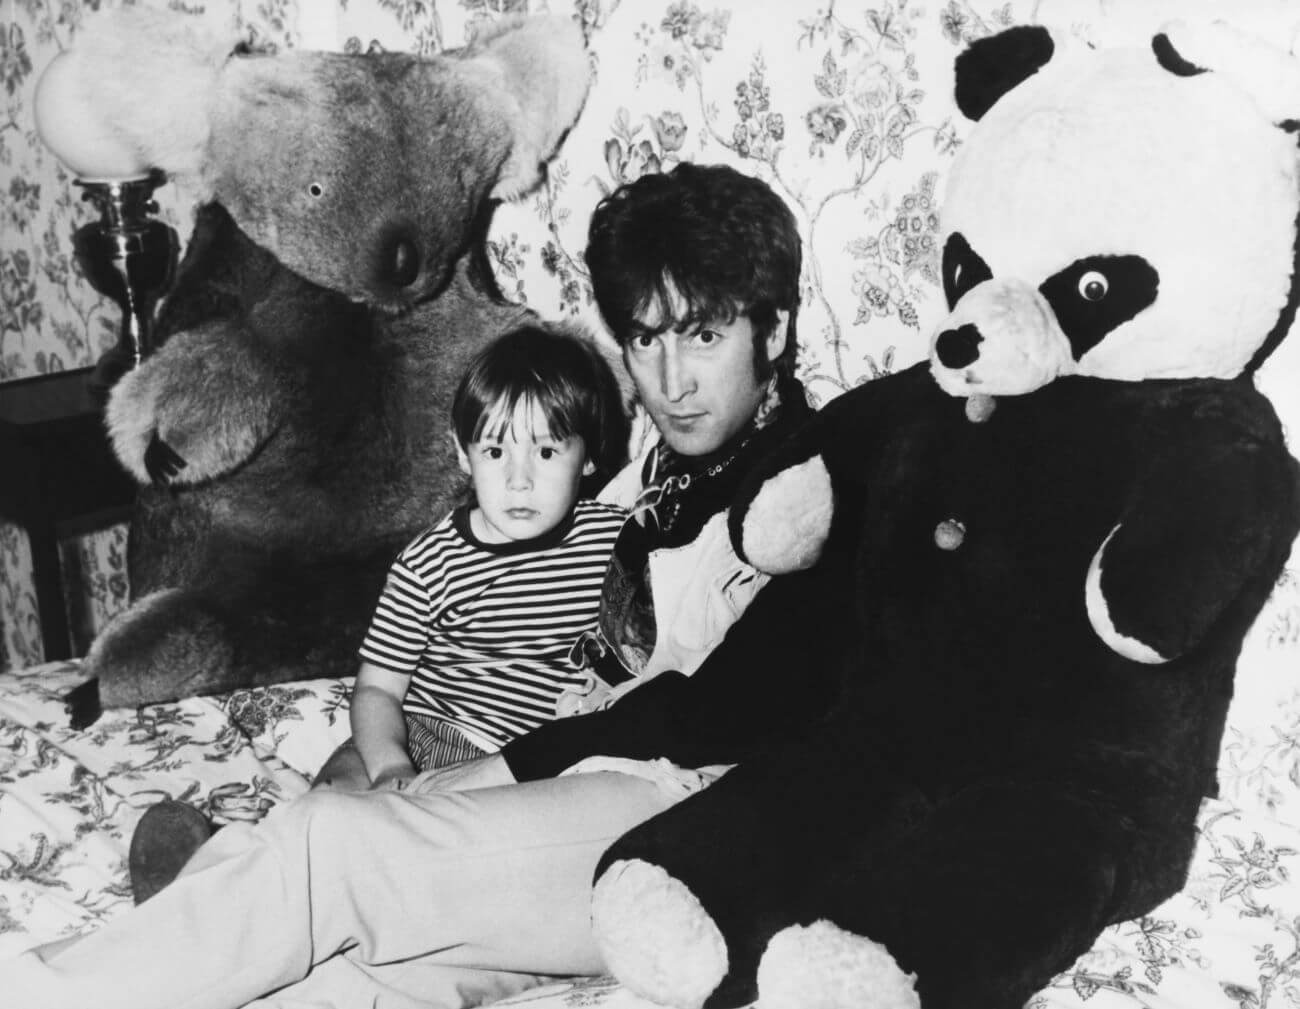 A black and white picture of Julian Lennon sitting with John Lennon sitting on a bed between two large stuffed bears.